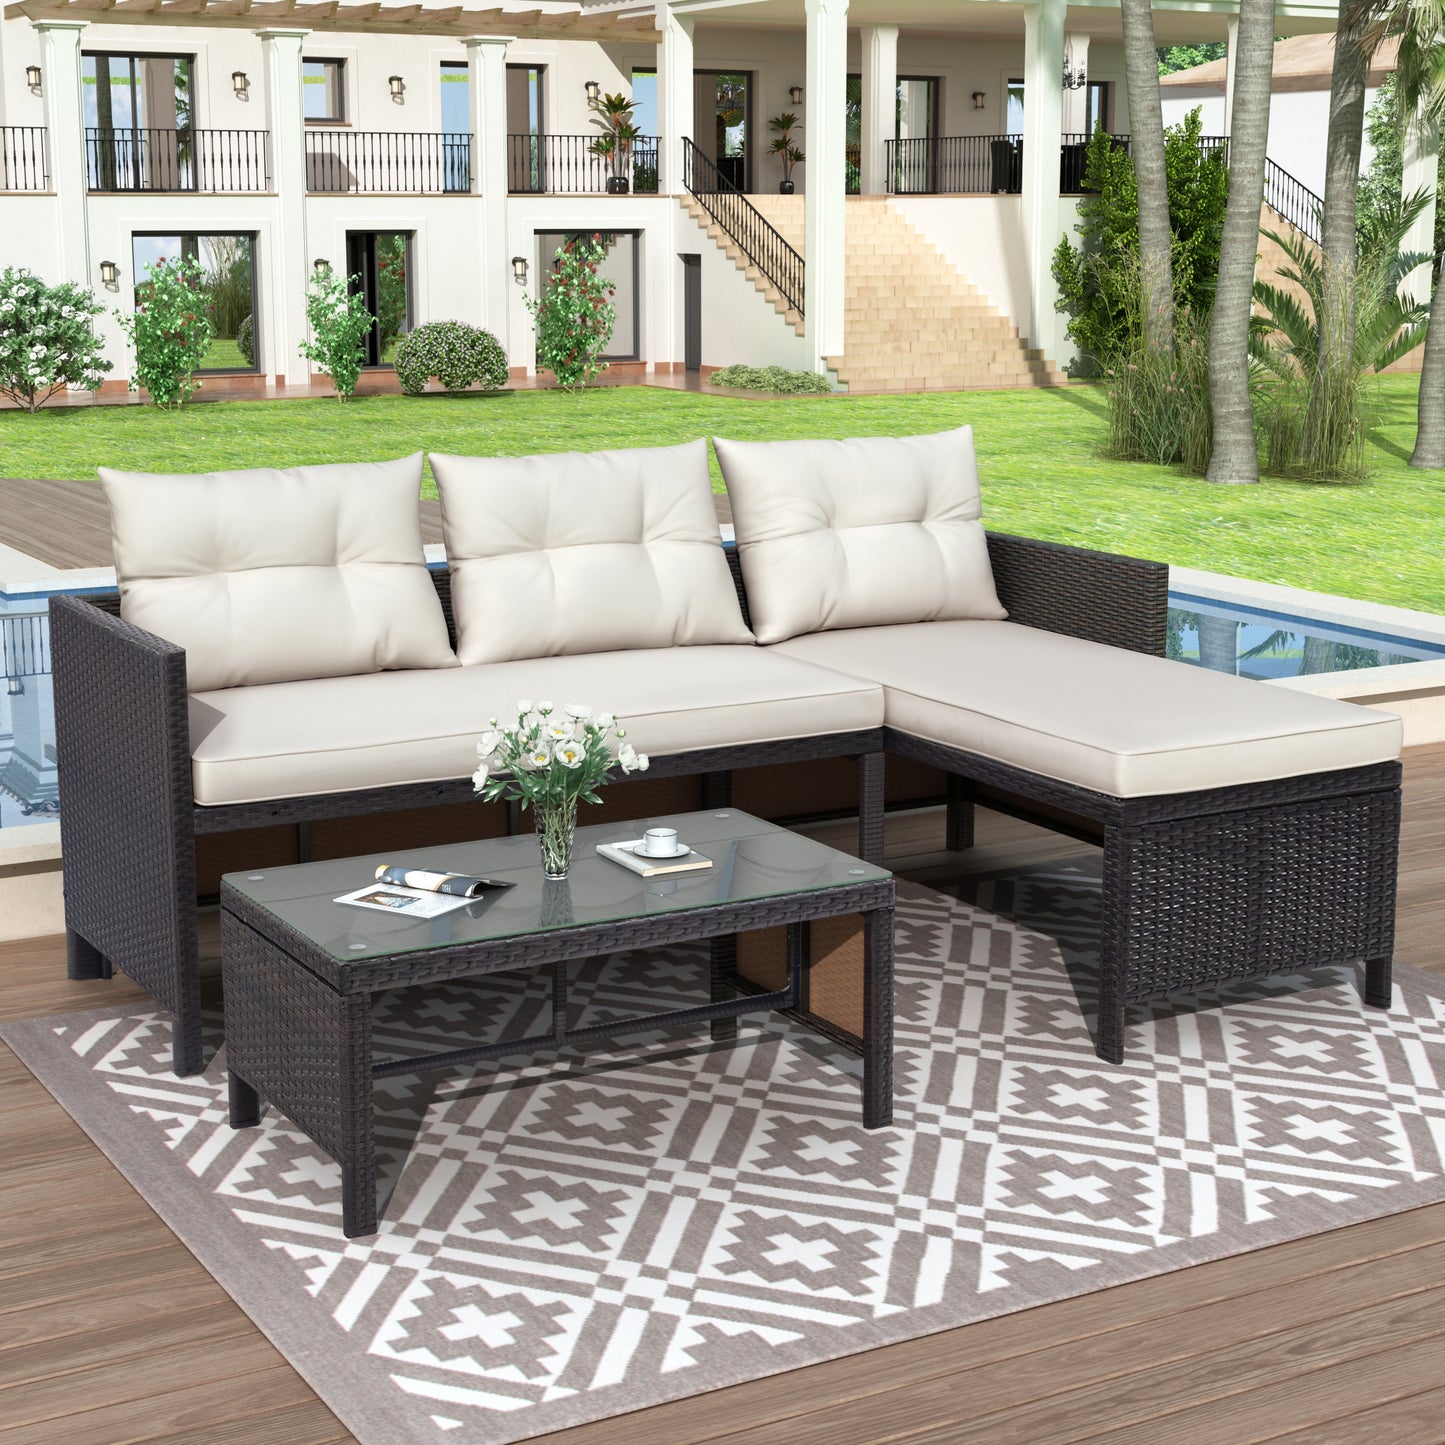 SYNGAR 3 Pieces PE Wicker Furniture Set, Patio Conversation Furniture Set with Two-Seater Sofa, Lounge Chair, Table & Cushions, Outdoor Sectional Sofa Set for Backyard, Deck, Balcony, Poolside, D6032